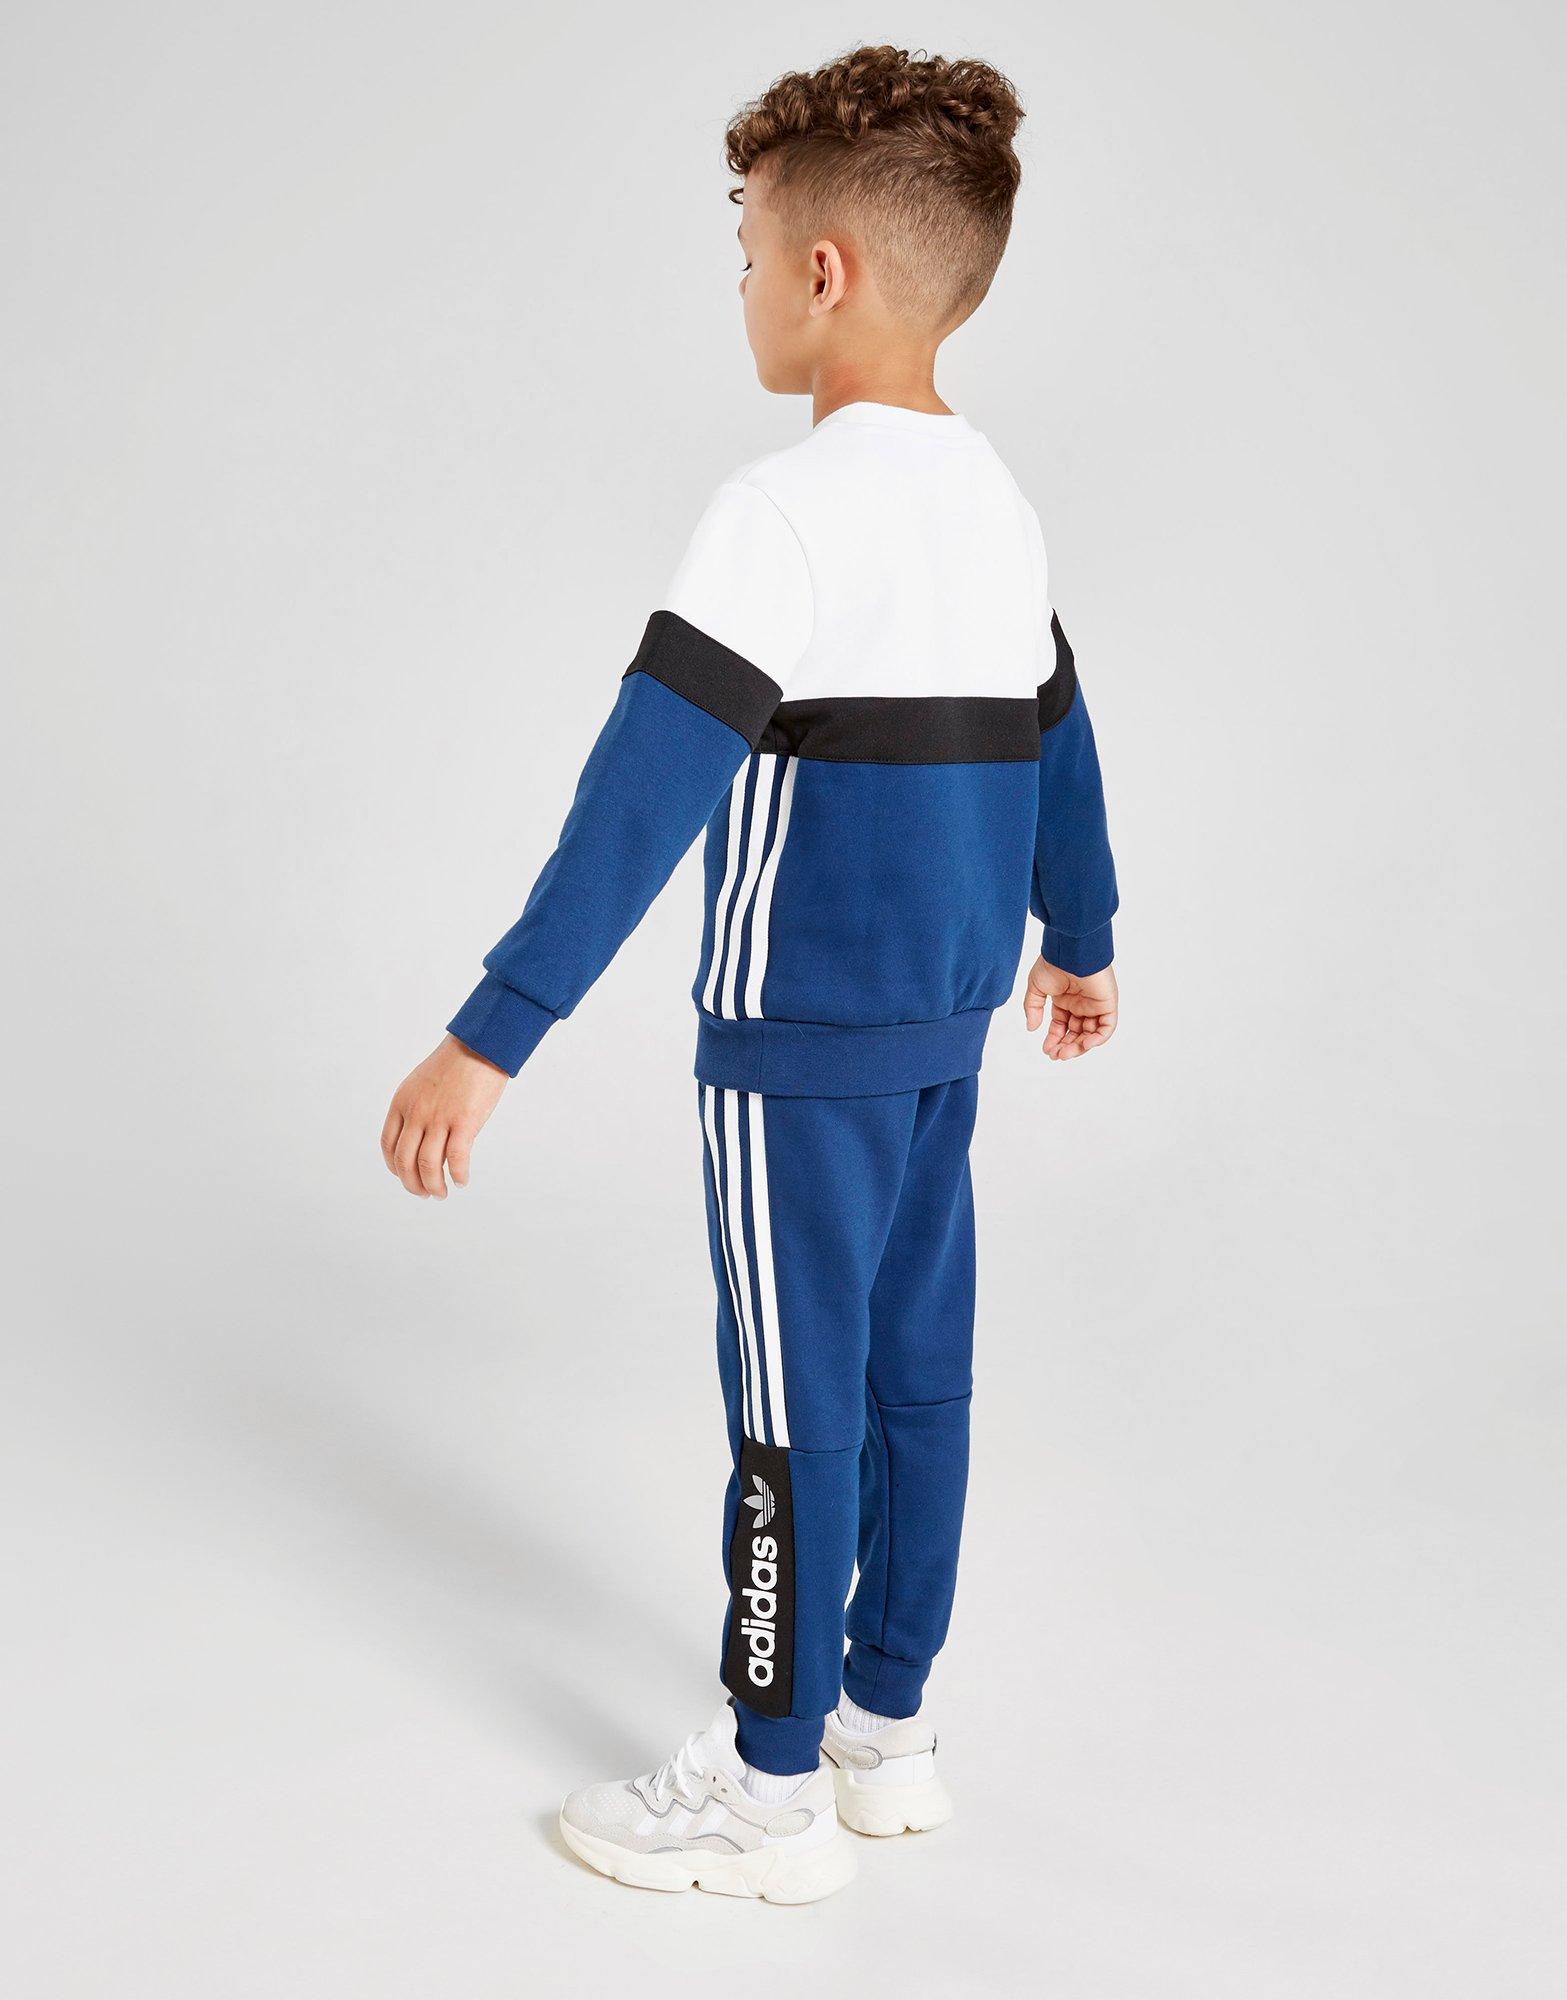 adidas challenger tracksuit